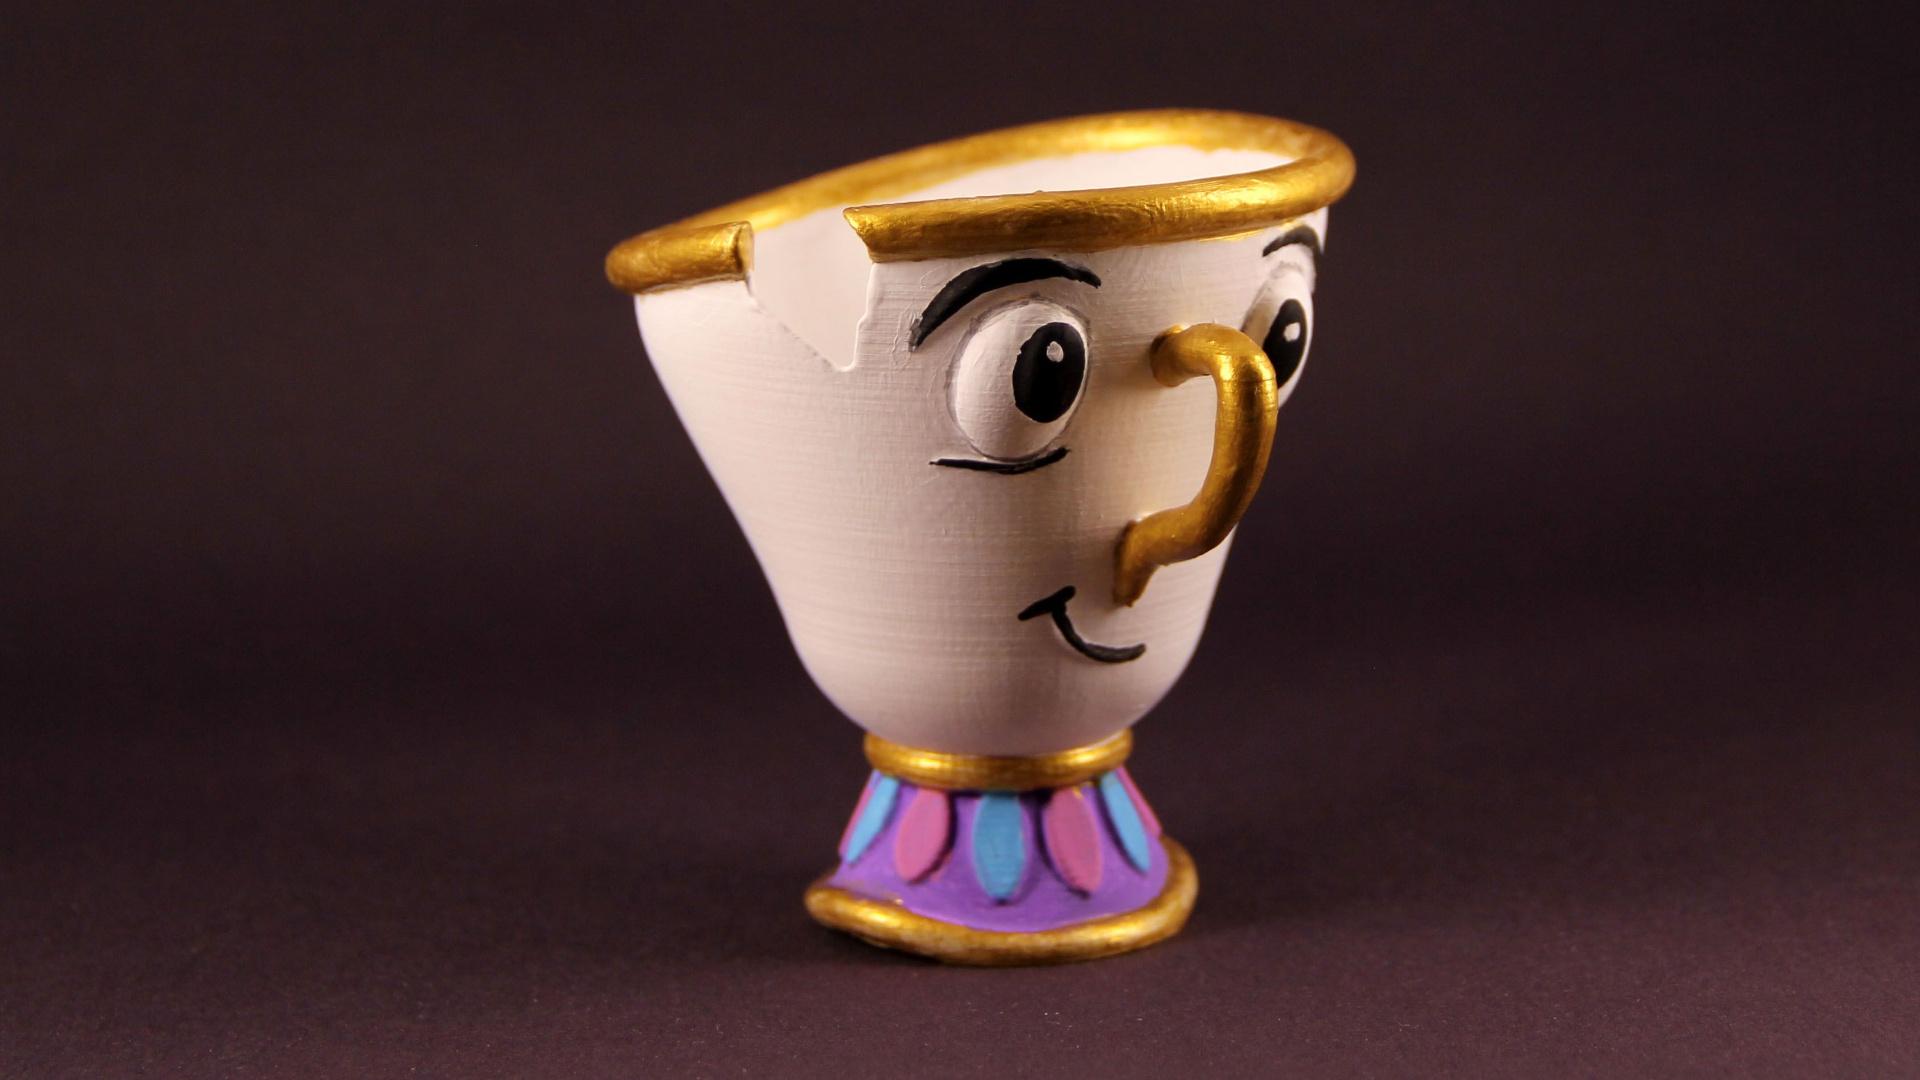 Chip from beauty and the beast - easy print, no support - Had lots of fun painting this cute model - 3d model